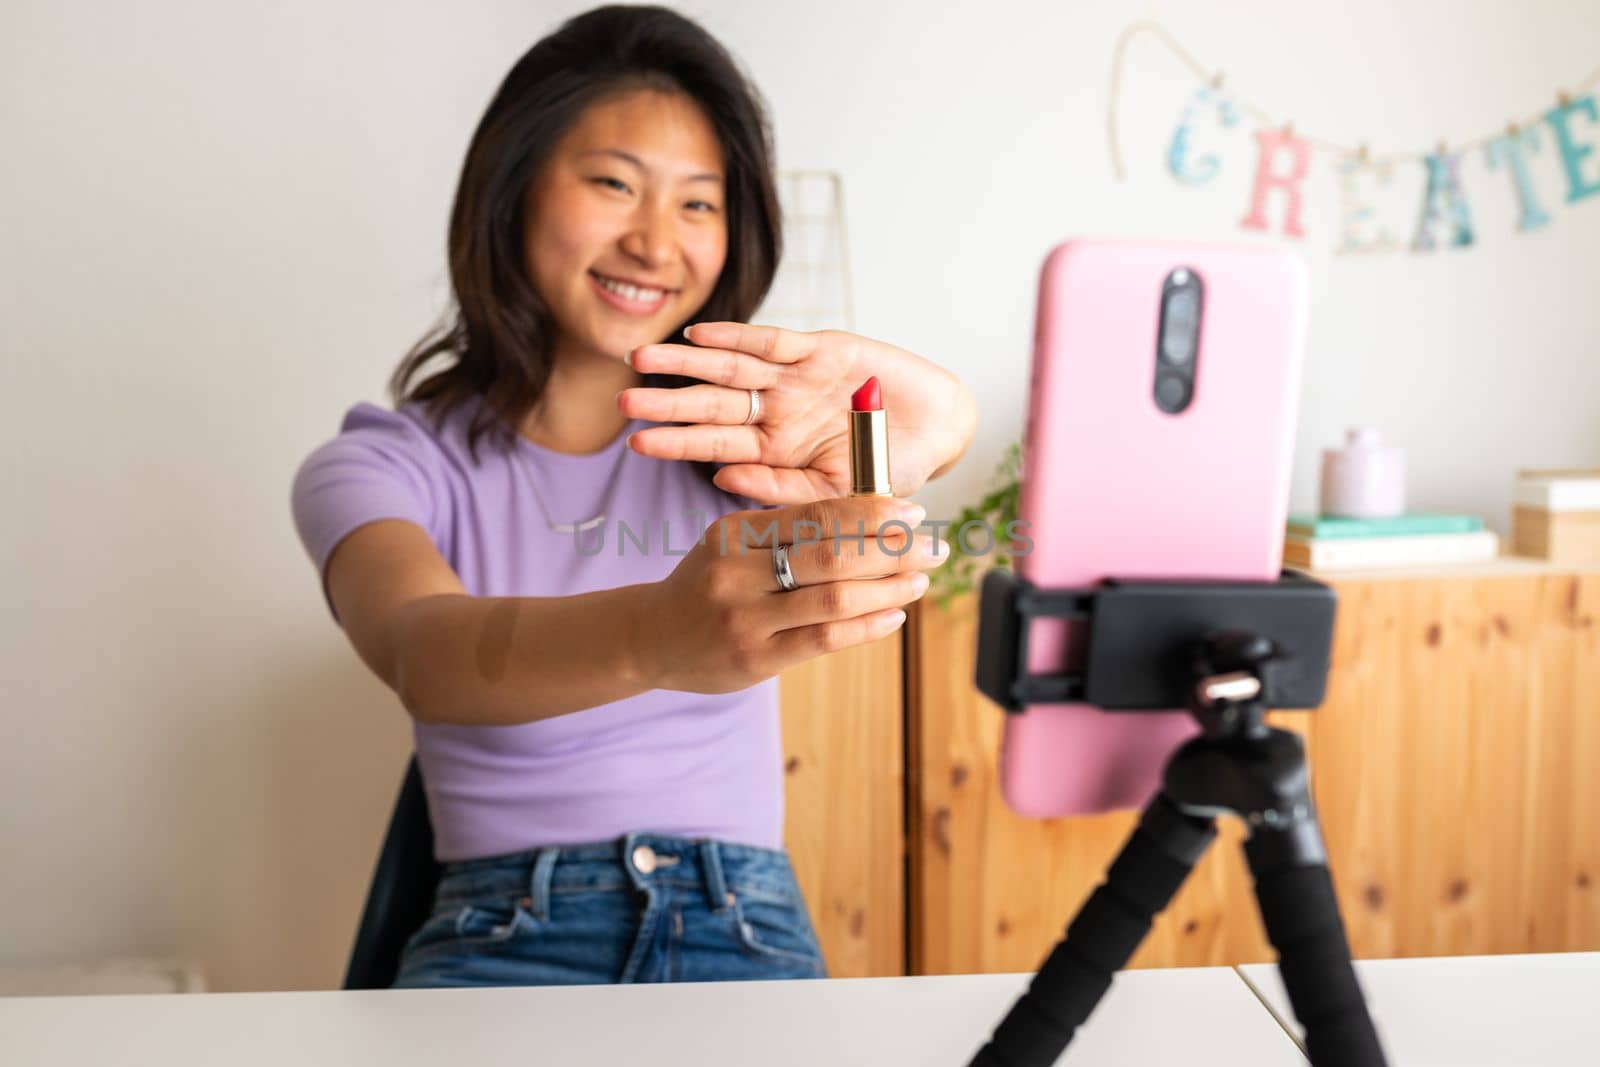 Happy young asian woman showing lipstick on camera, live streaming make up tutorial using phone on tripod. Social media and technology concepts.